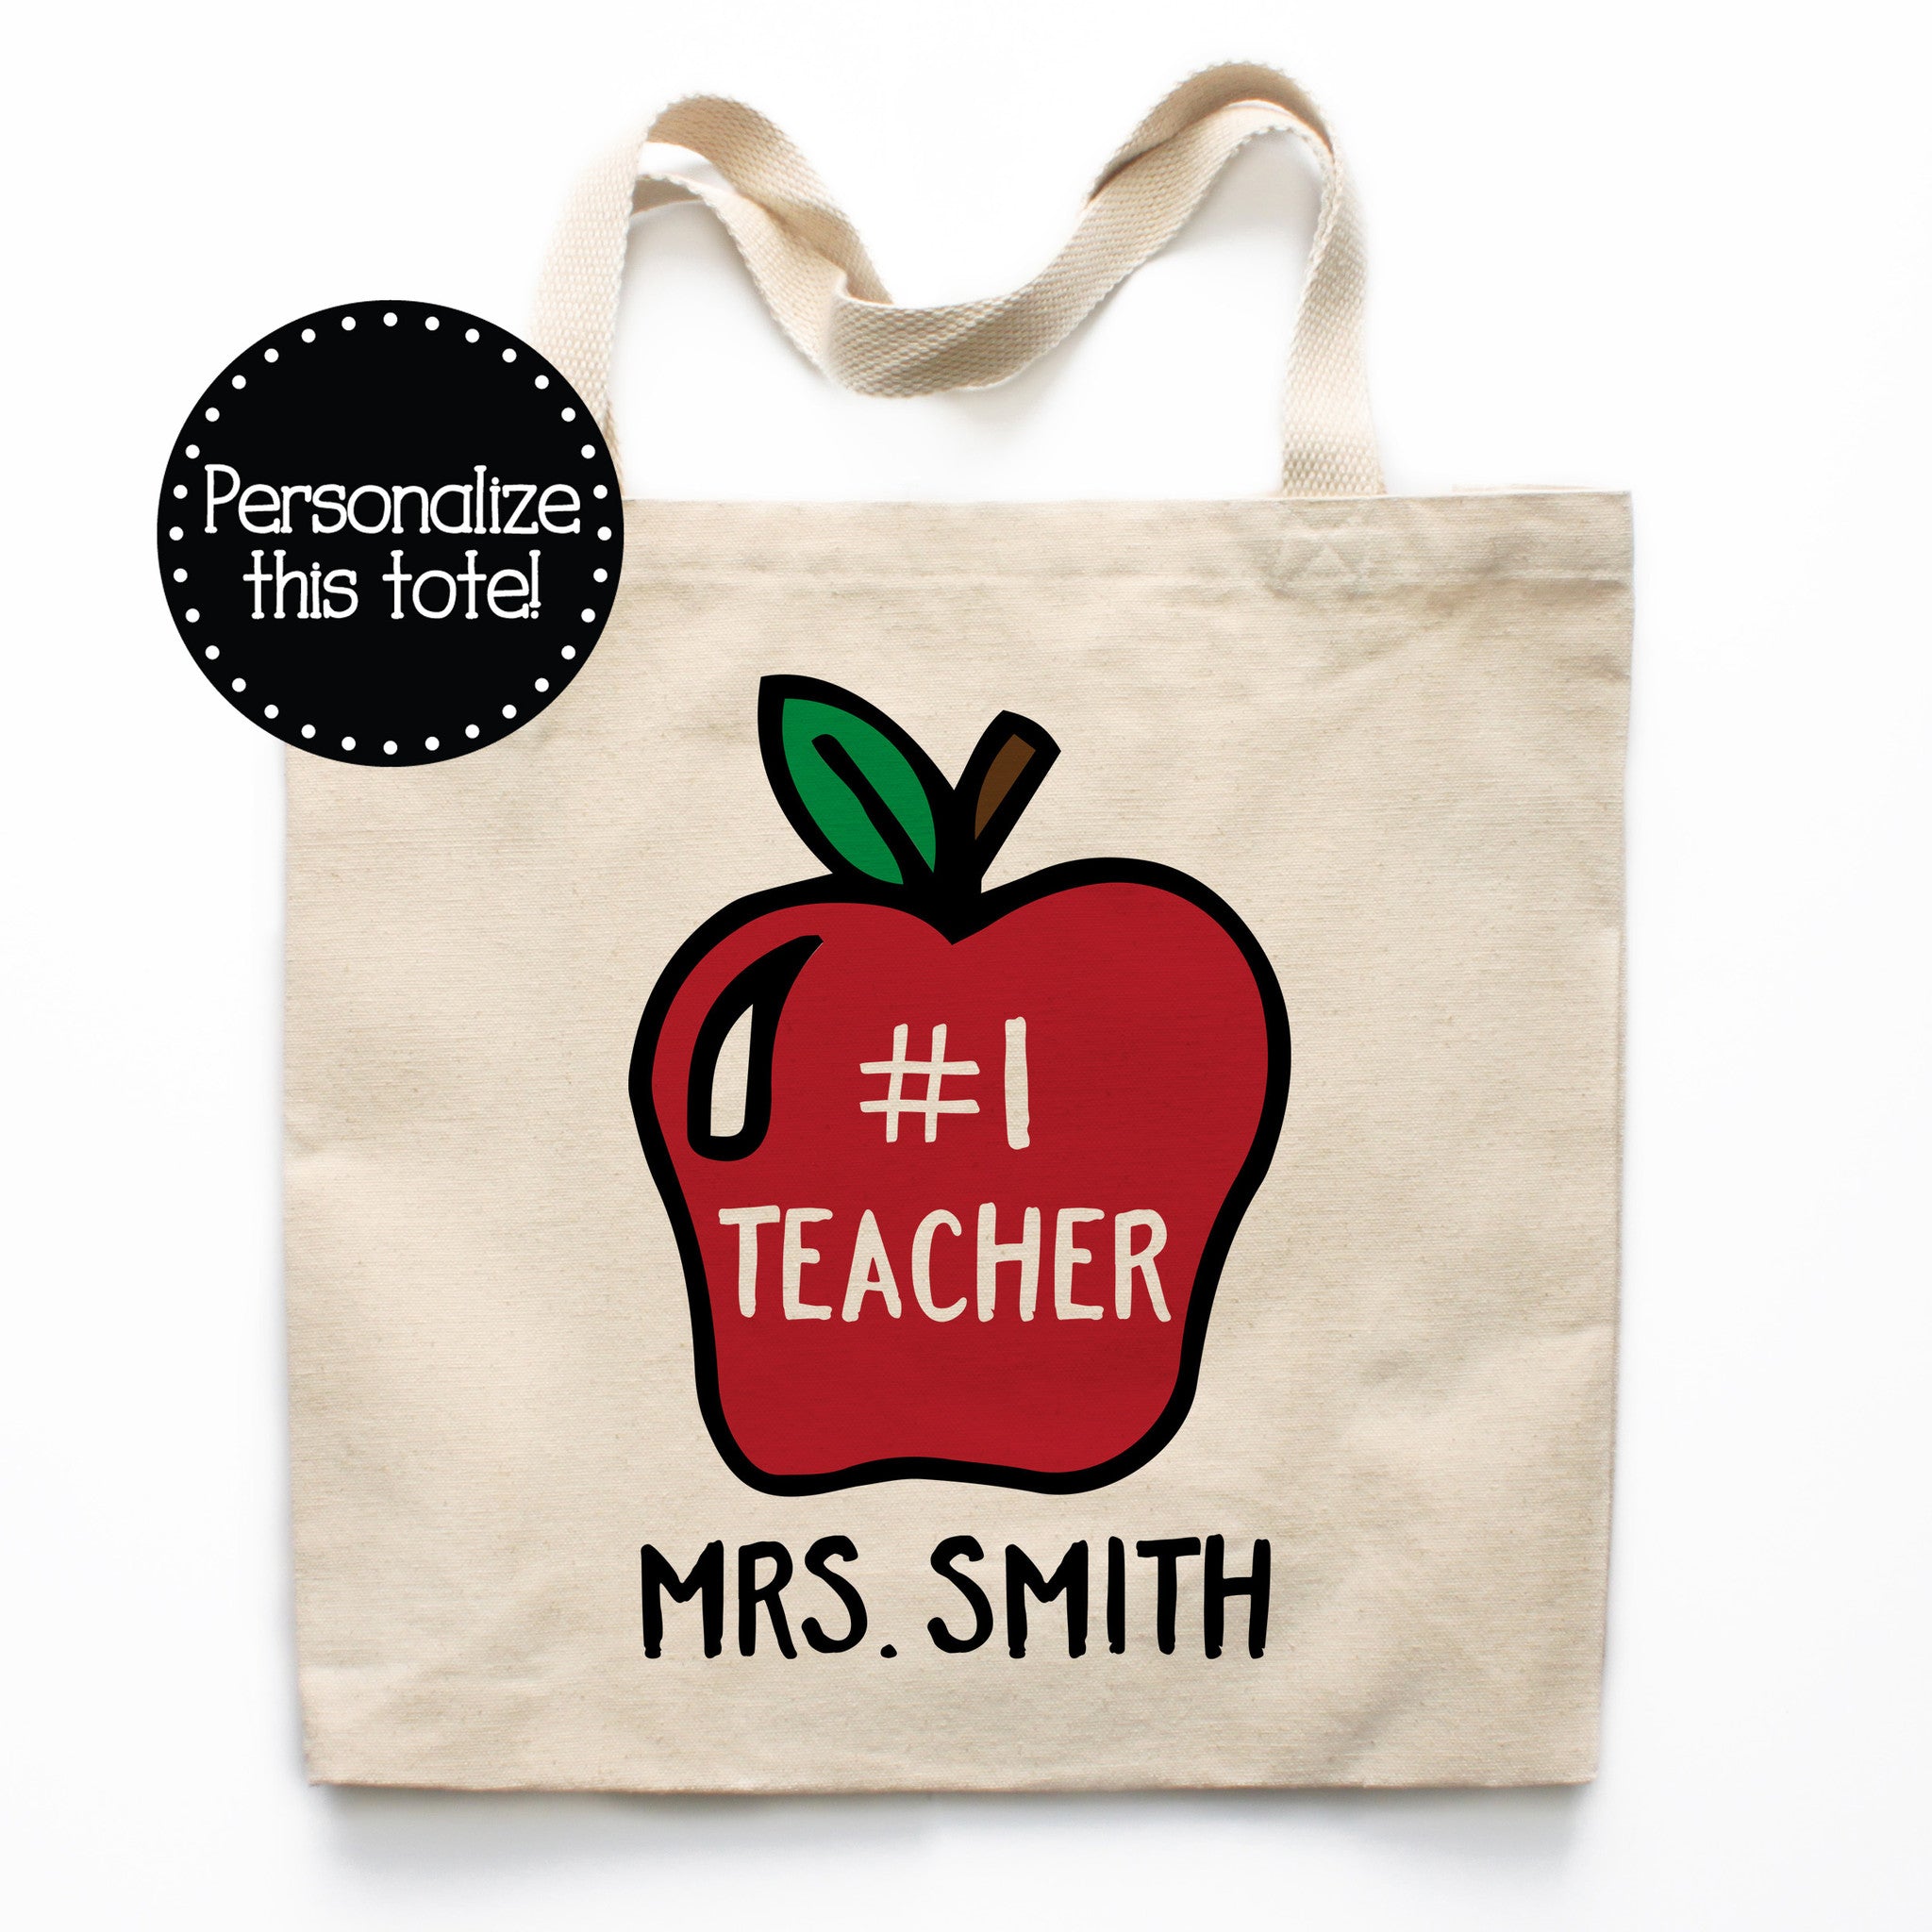 Letter Printed Casual Canvas Shopping Bag/tote Bag, Teacher Tote Bag